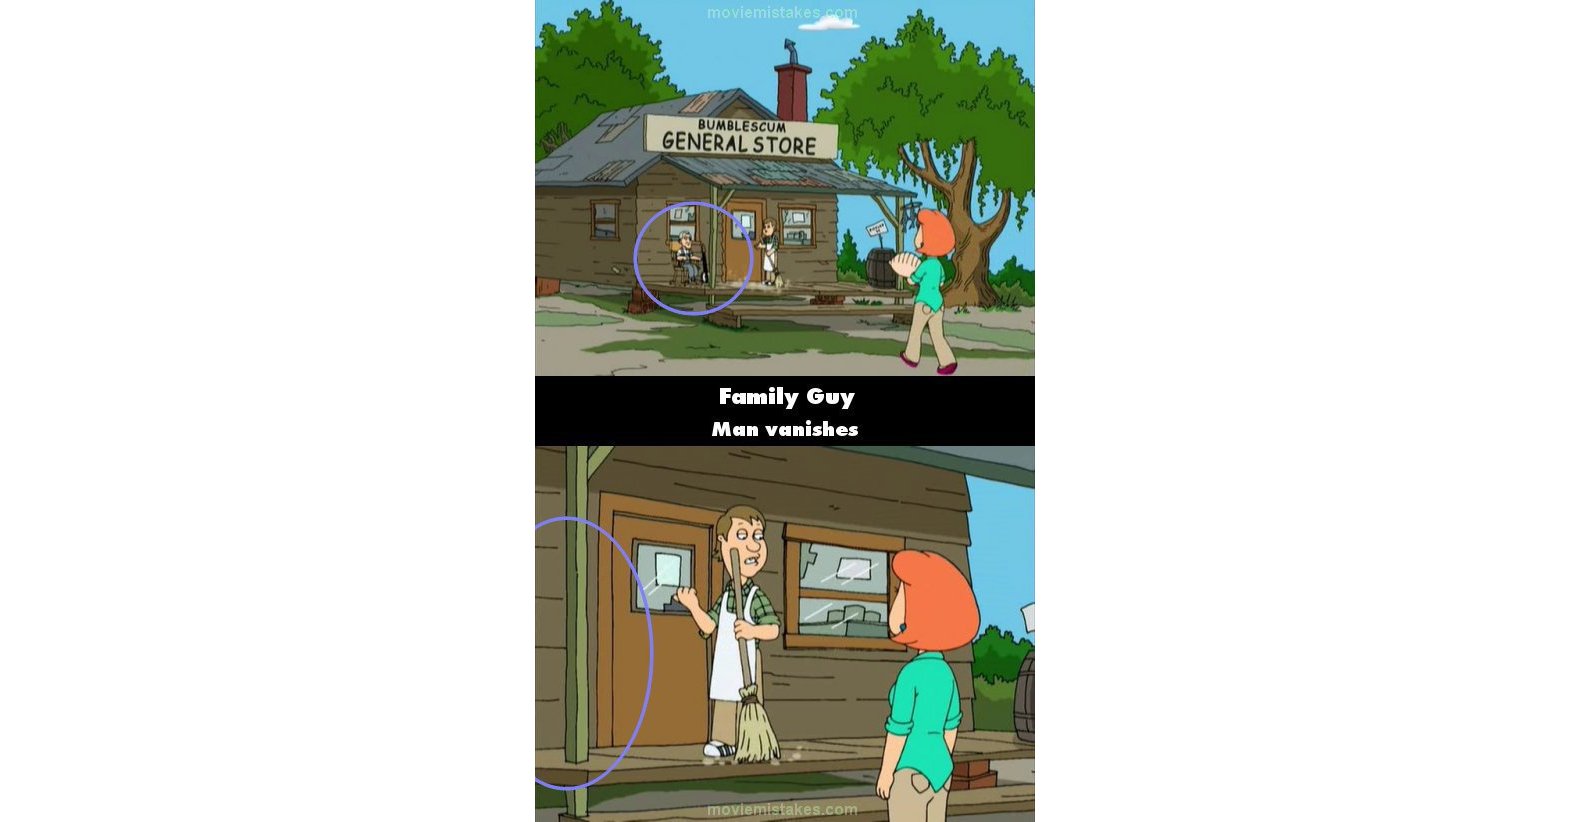 Family Guy (1999) TV mistake picture (ID 132679)